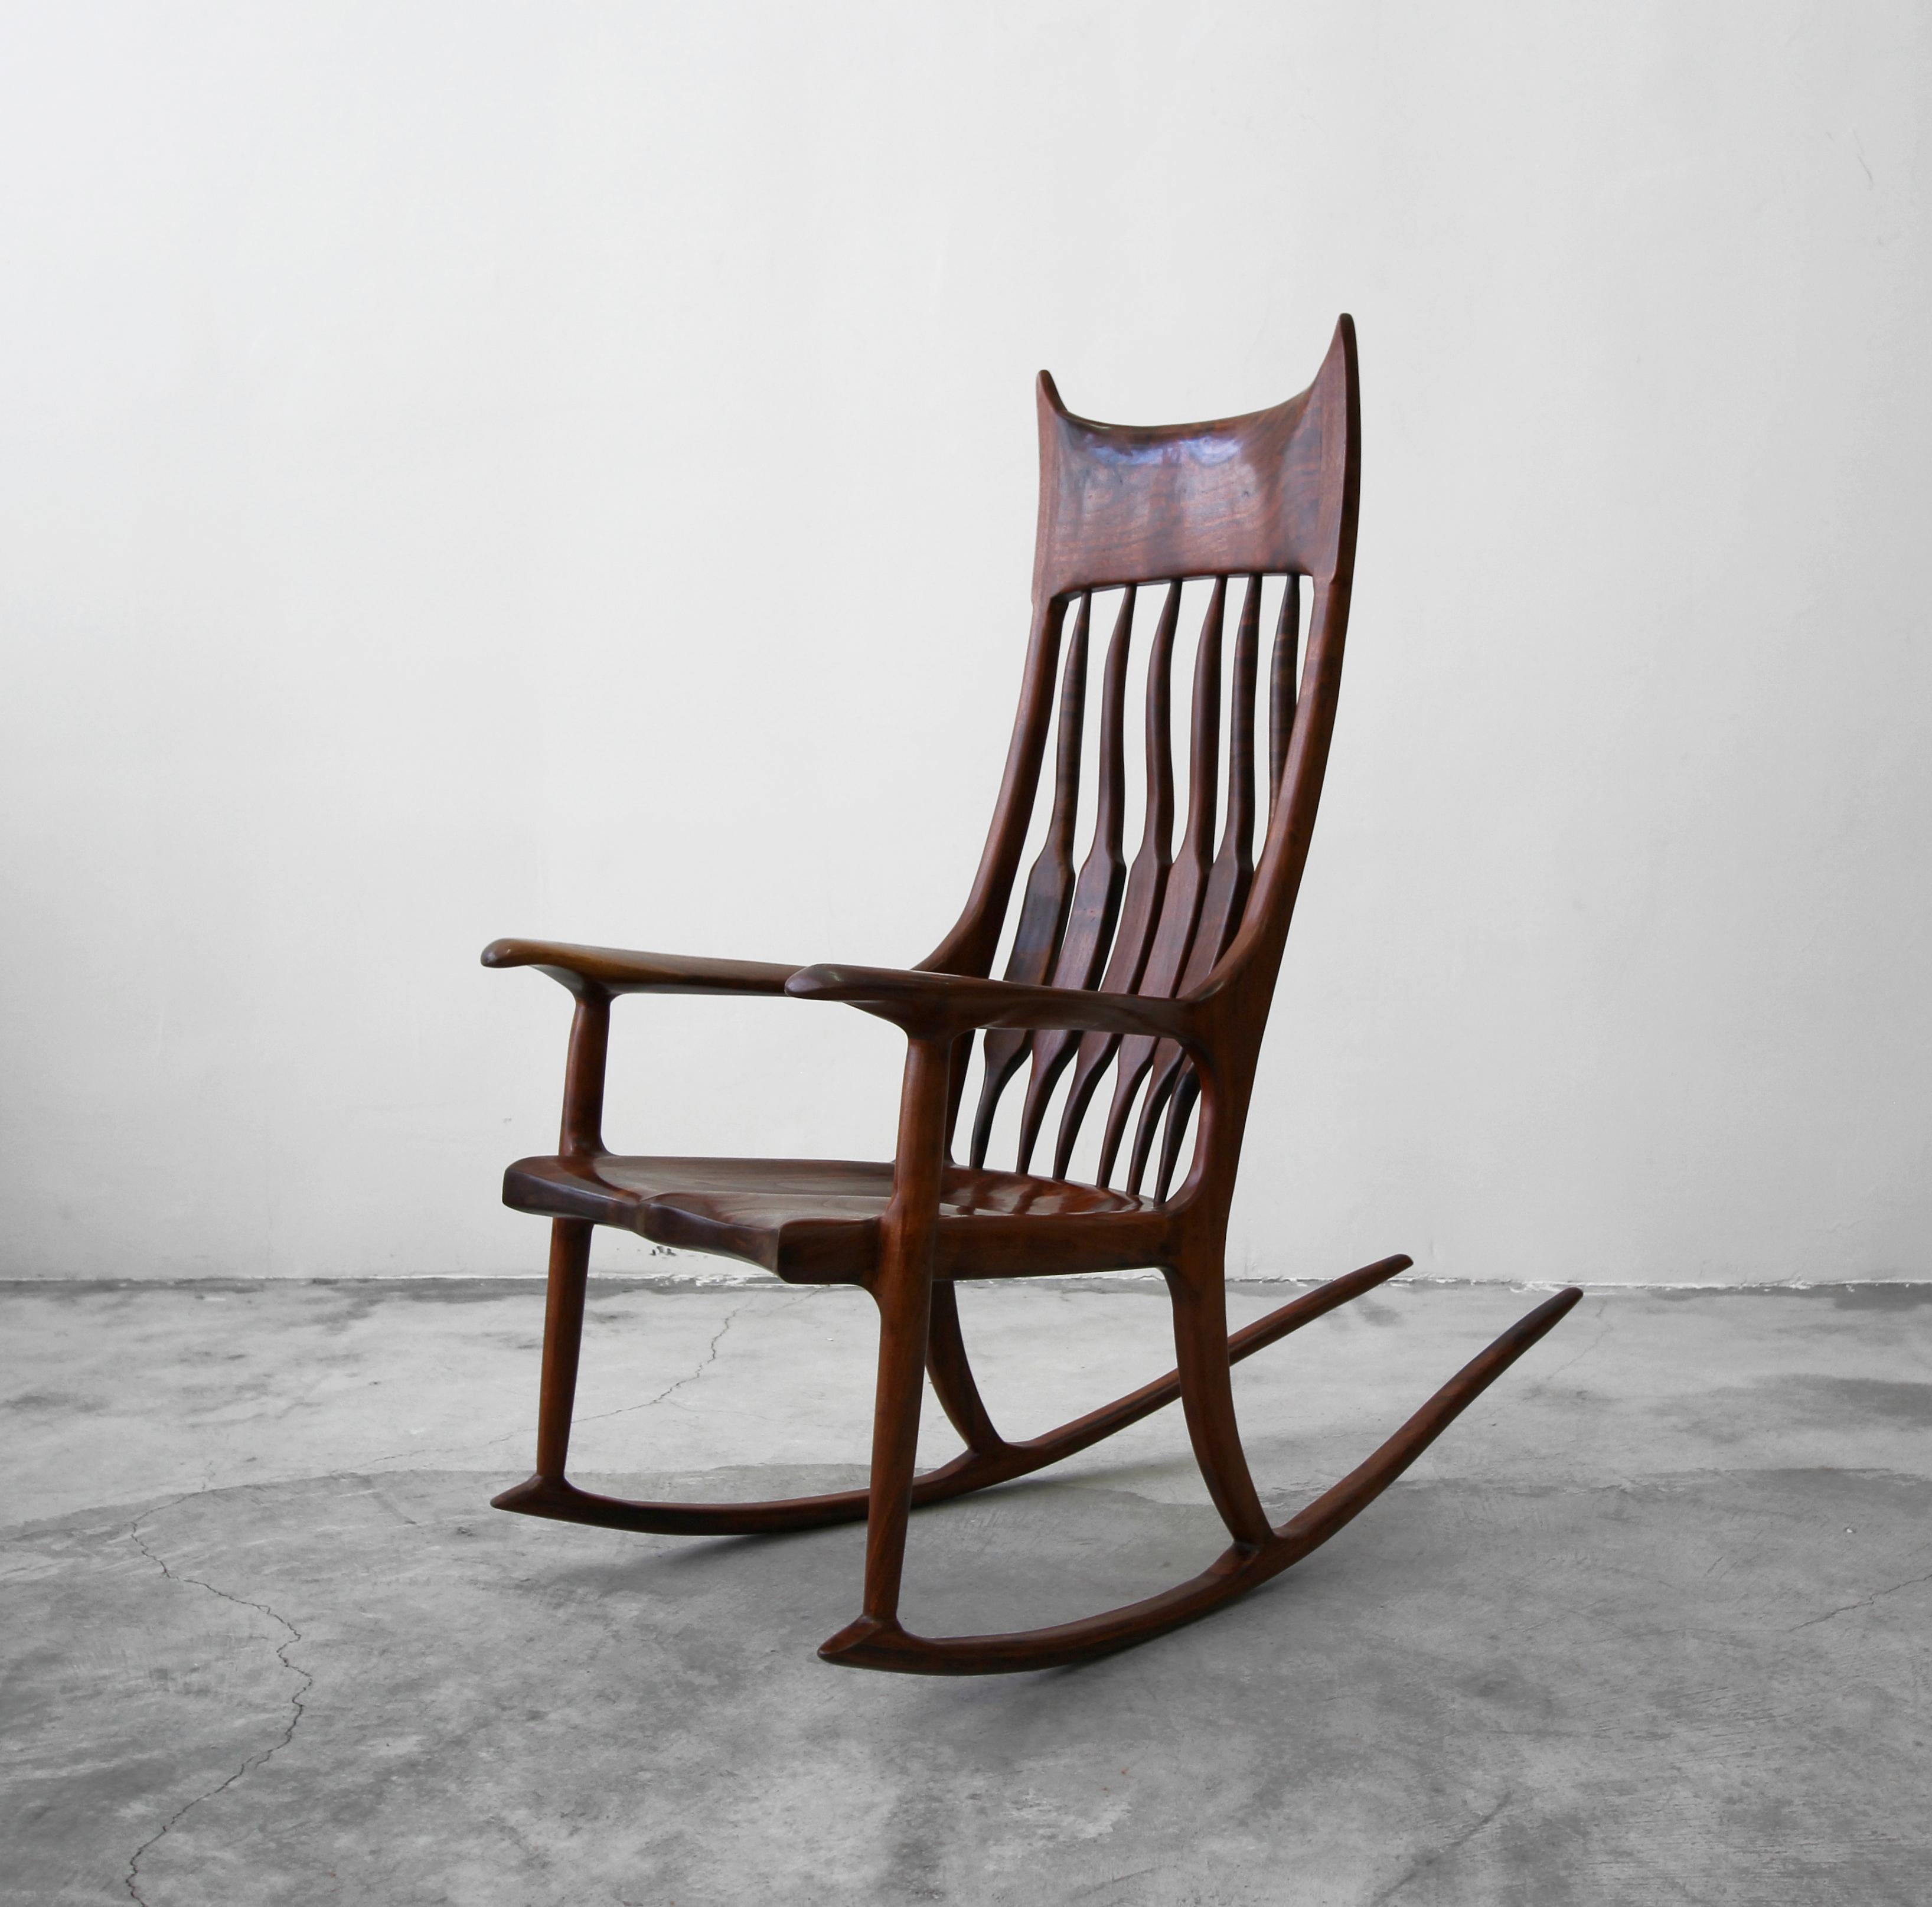 Designed after the notable Sam Maloof rocker comes this exquisite example of fine craftsmanship. Handcrafted in 1990 by Bill Sittman, this stunning piece is sculpted entirely of heavily grained, solid wood, finished expertly, with seamless